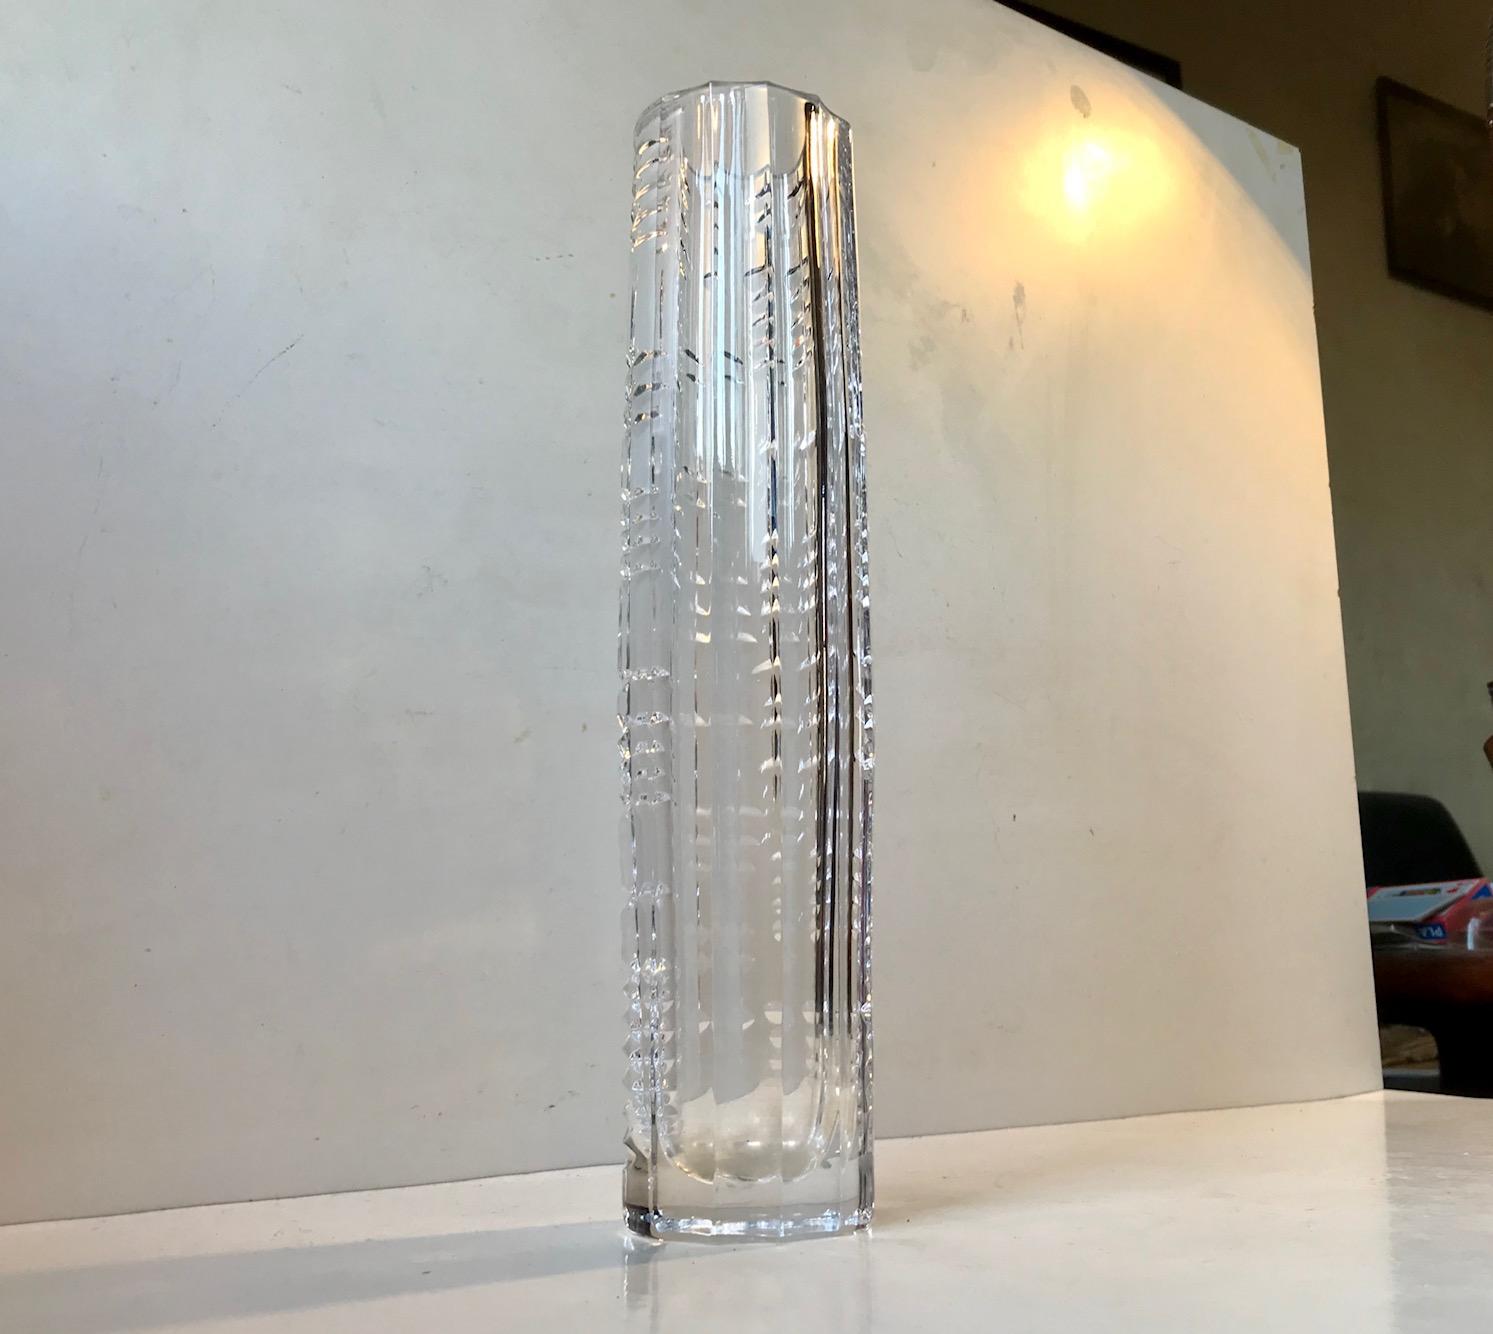 A cut crystal torpedo shaped vase presumably from either Kosta Boda or Orrefors. The vase features diffrent techniques most prominent is the mix of vertical ribbing to one side and a geometric crisscross of arrow patterns top the other side. It